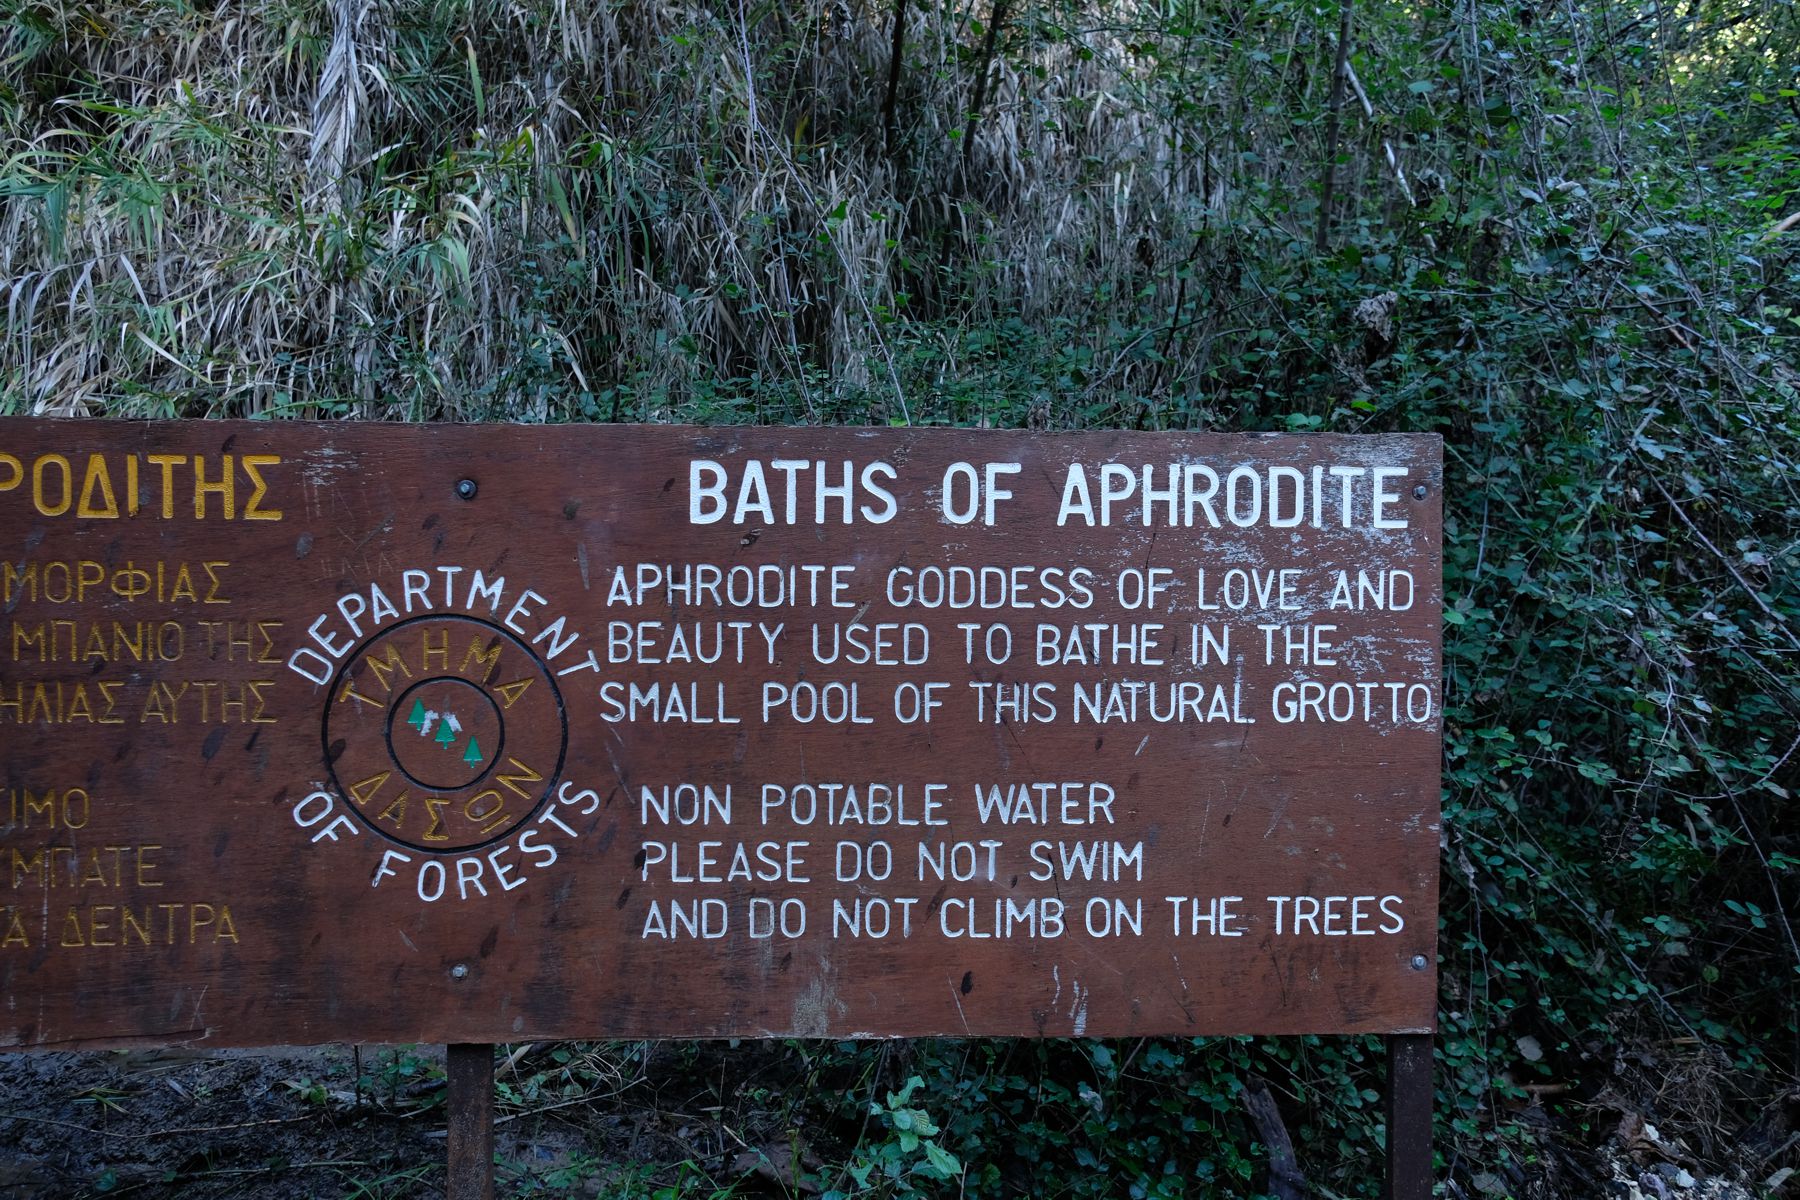 Things you cannot do in the baths of Aphrodite